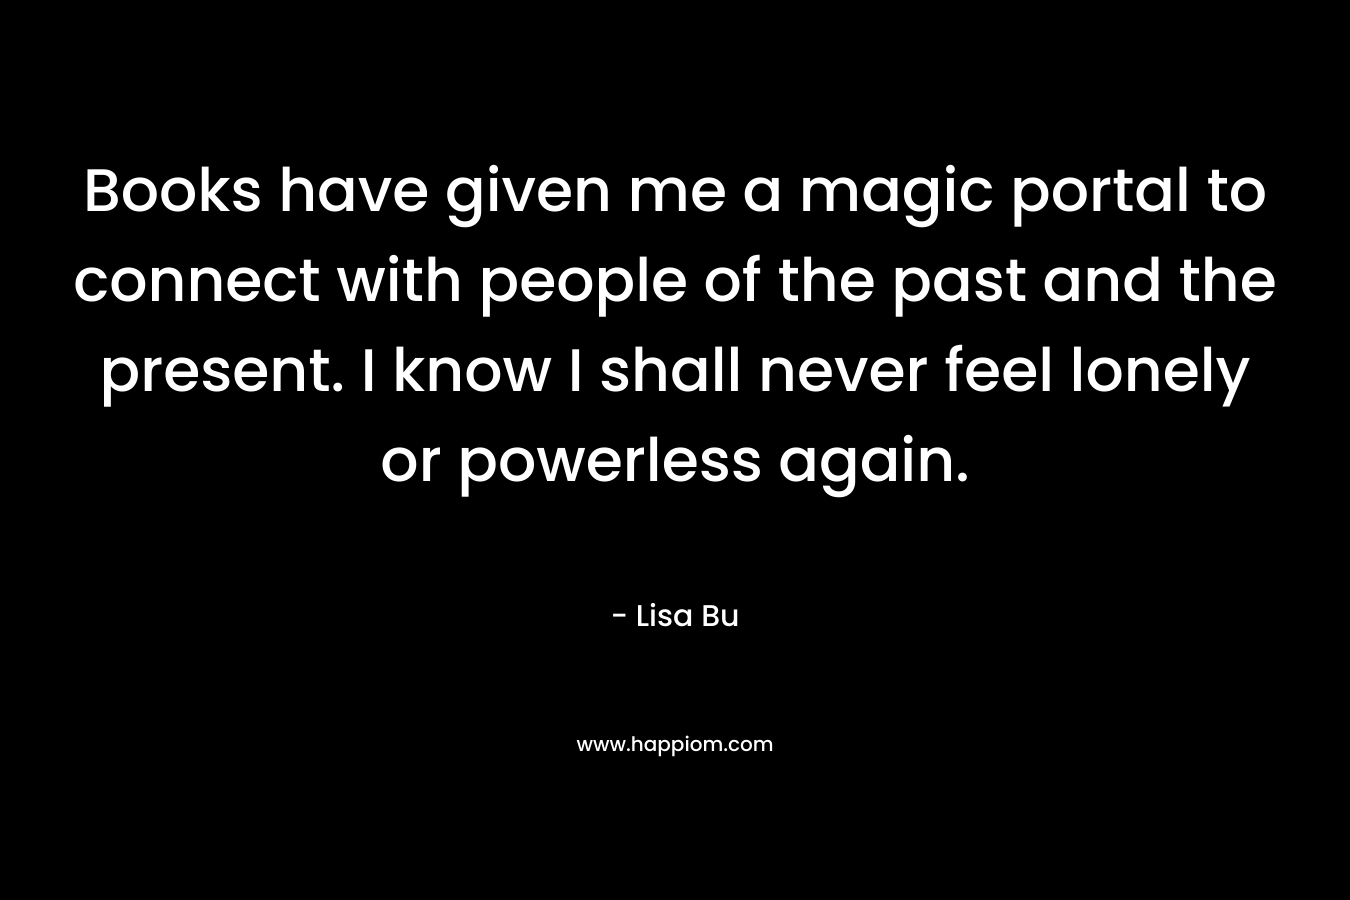 Books have given me a magic portal to connect with people of the past and the present. I know I shall never feel lonely or powerless again. – Lisa Bu